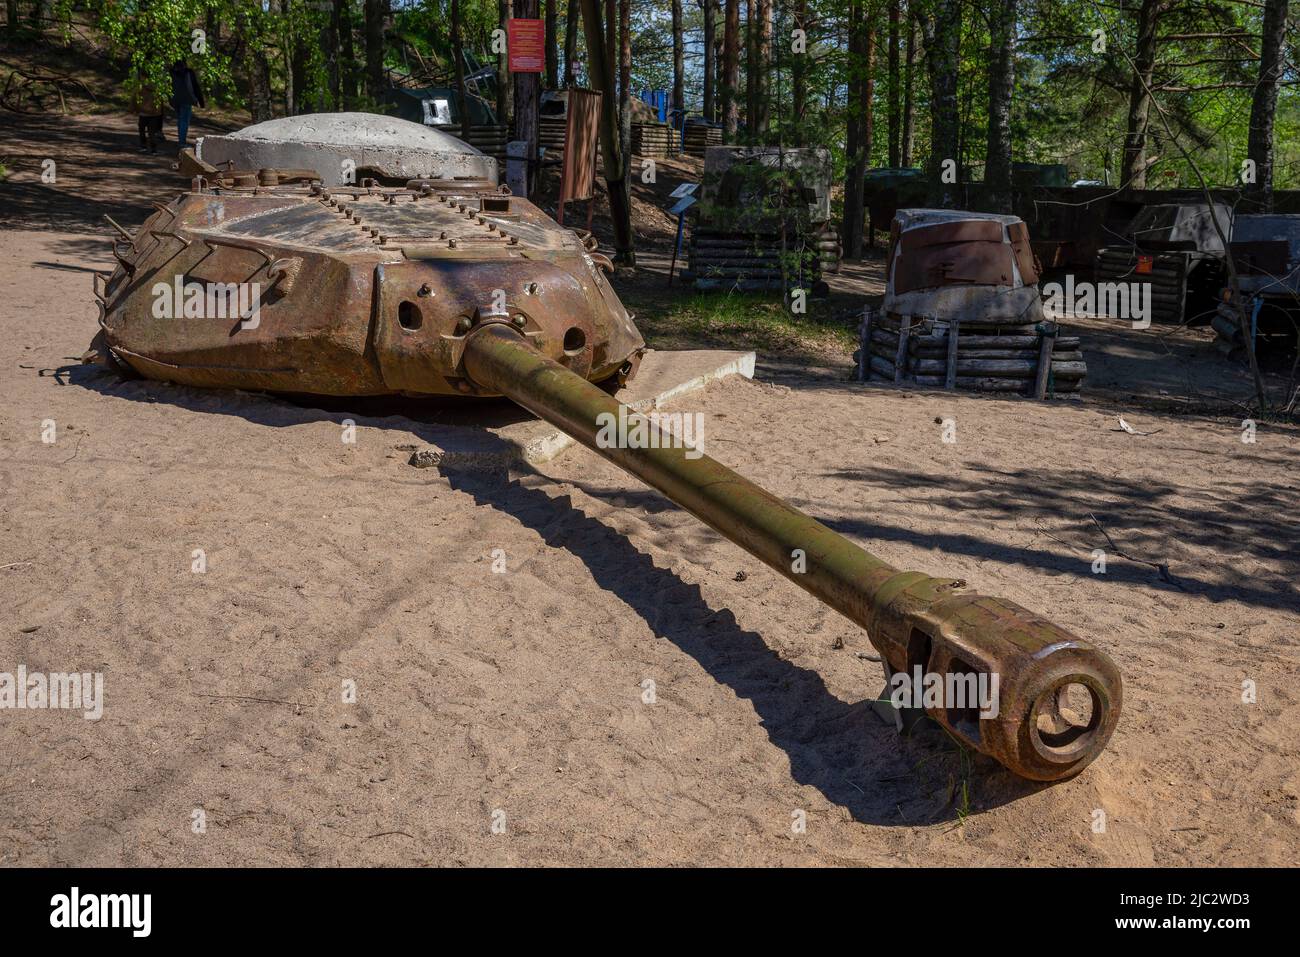 SESTRORETSK, RUSSIA - MAY 29, 2022: AFDS artillery installation based on the IS-4 tank turret. Sestroretsky frontier Stock Photo